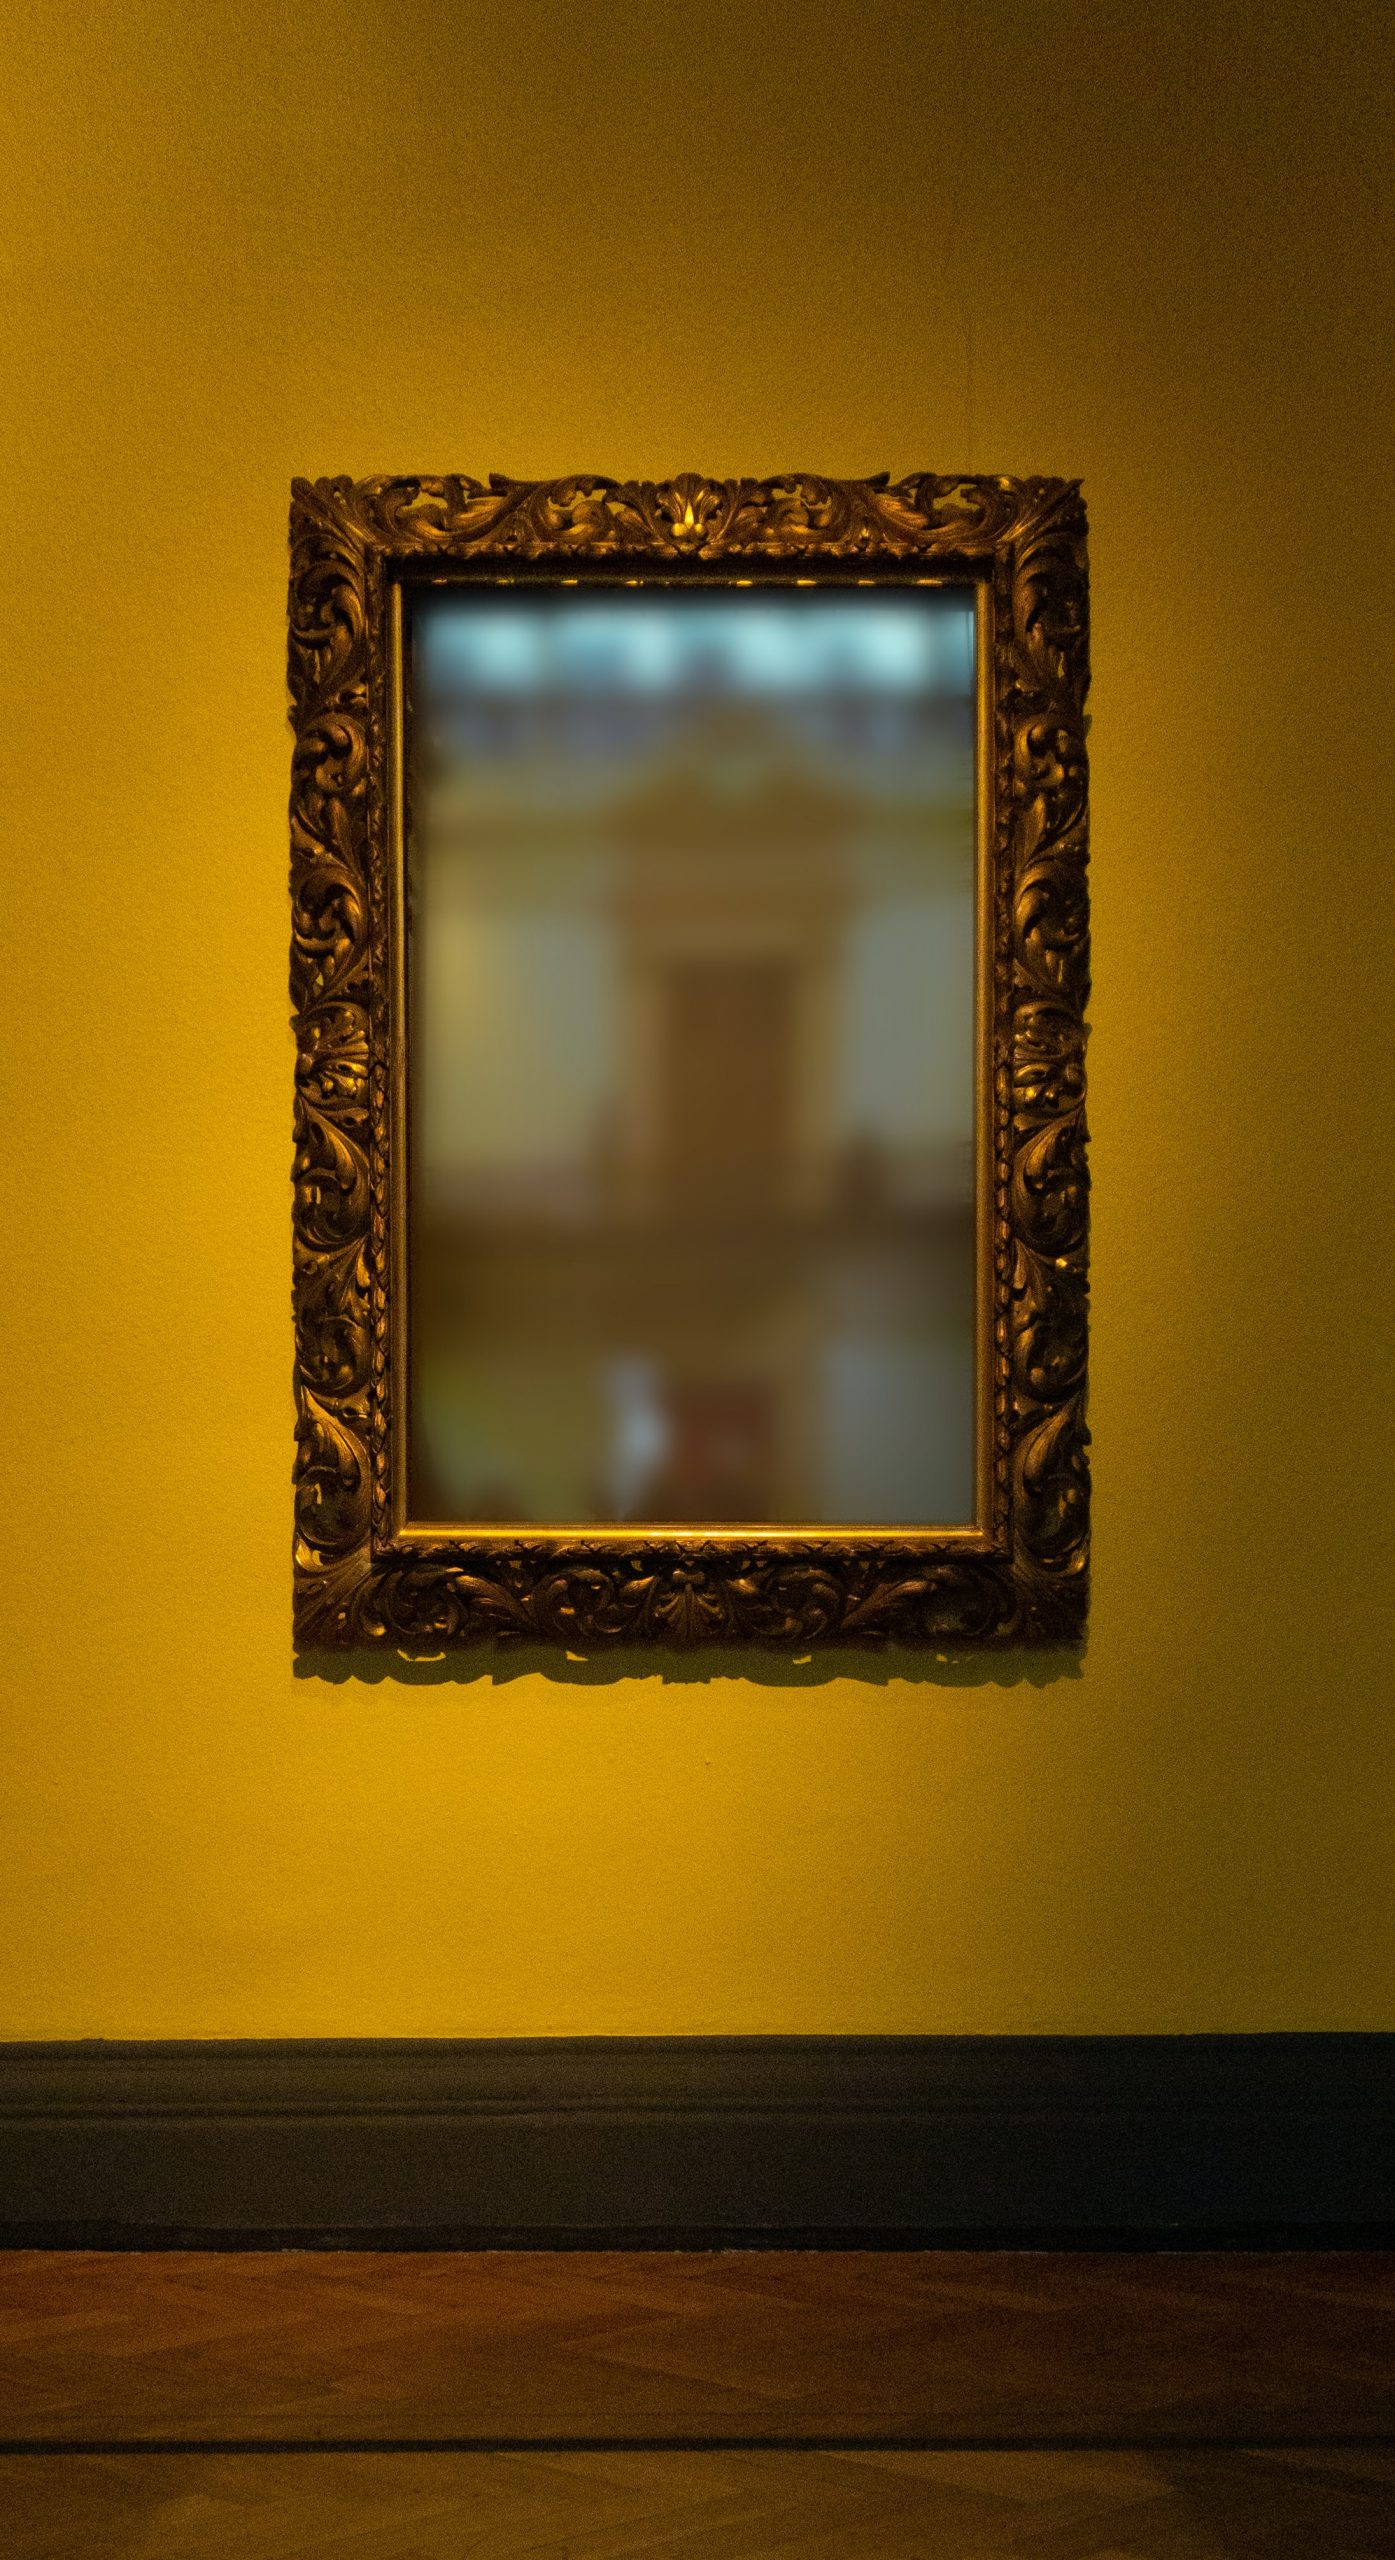 image of a mirror in a frame